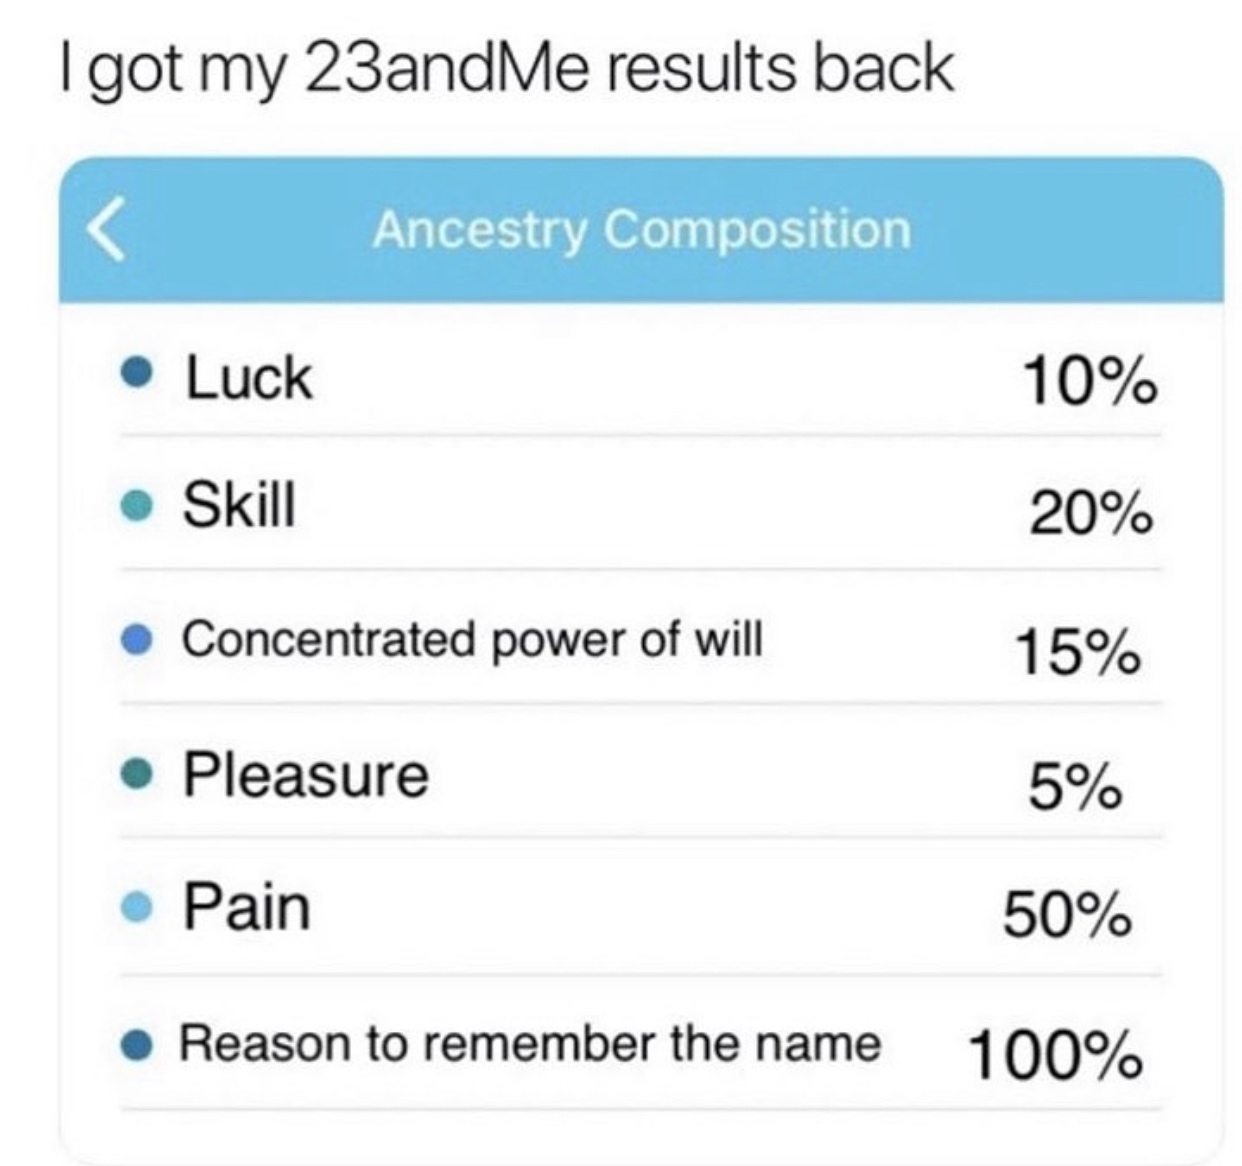 number - I got my 23andMe results back